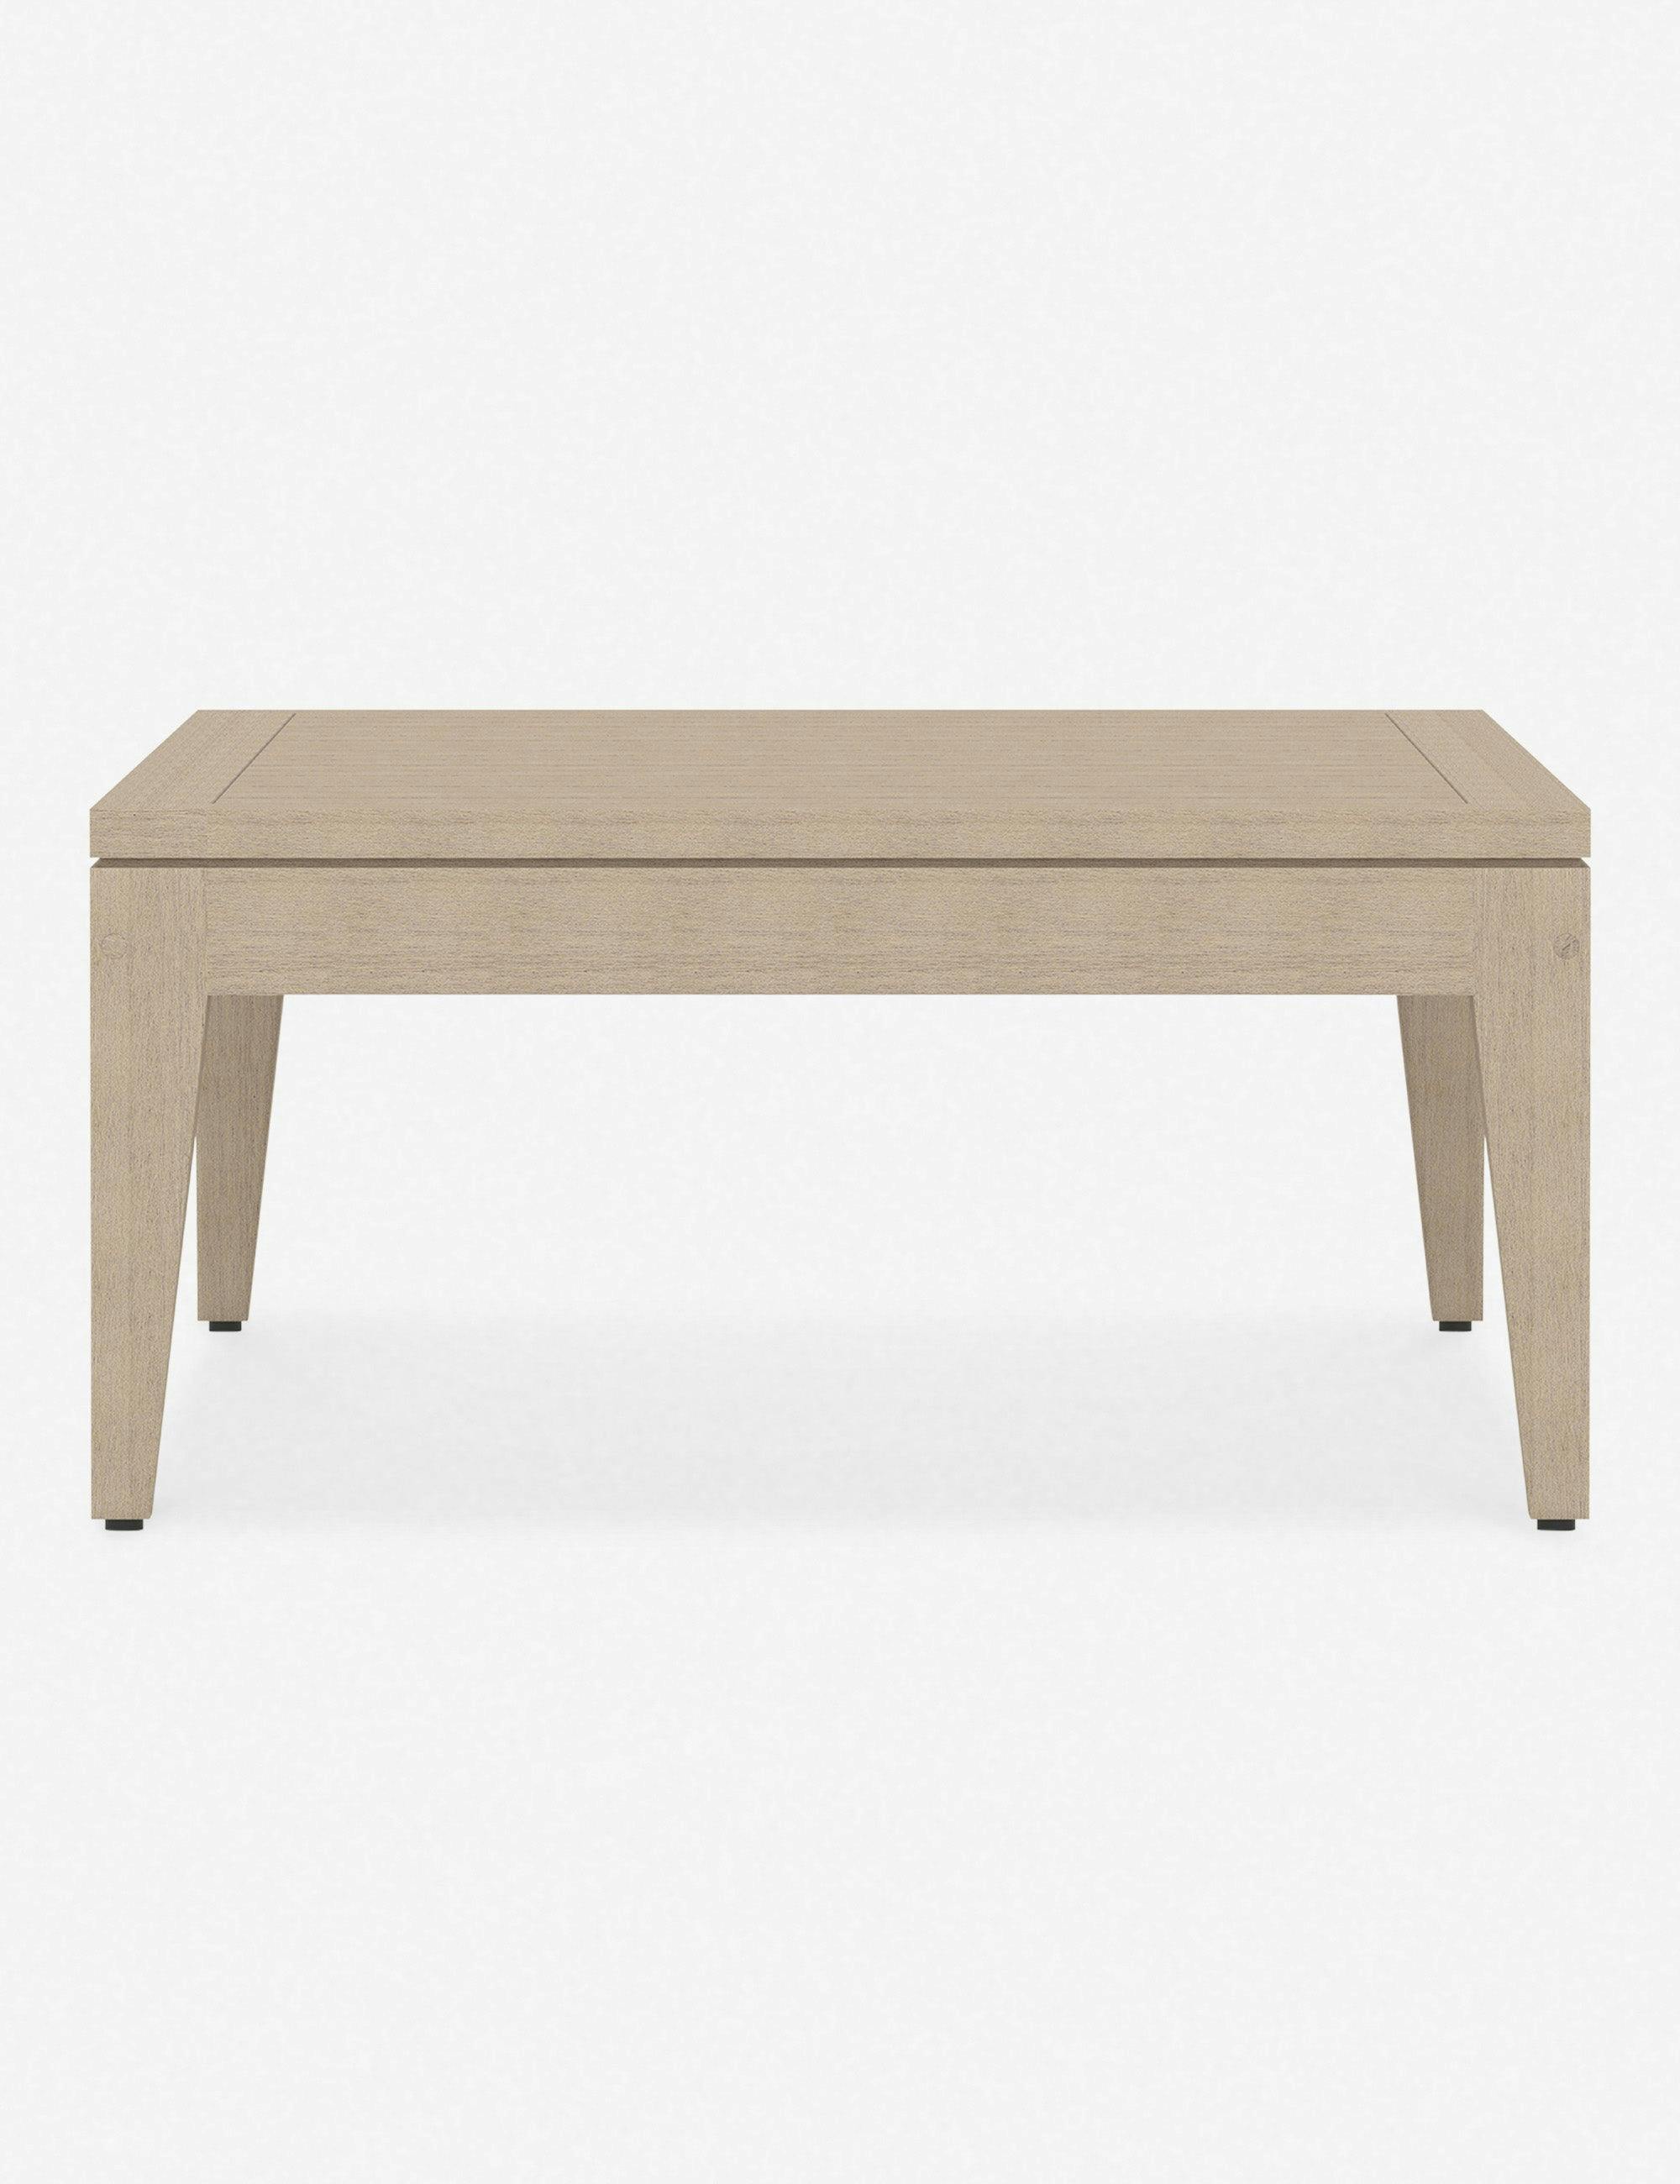 Sherwood Contemporary Teak Rectangular Coffee Table in Washed Brown